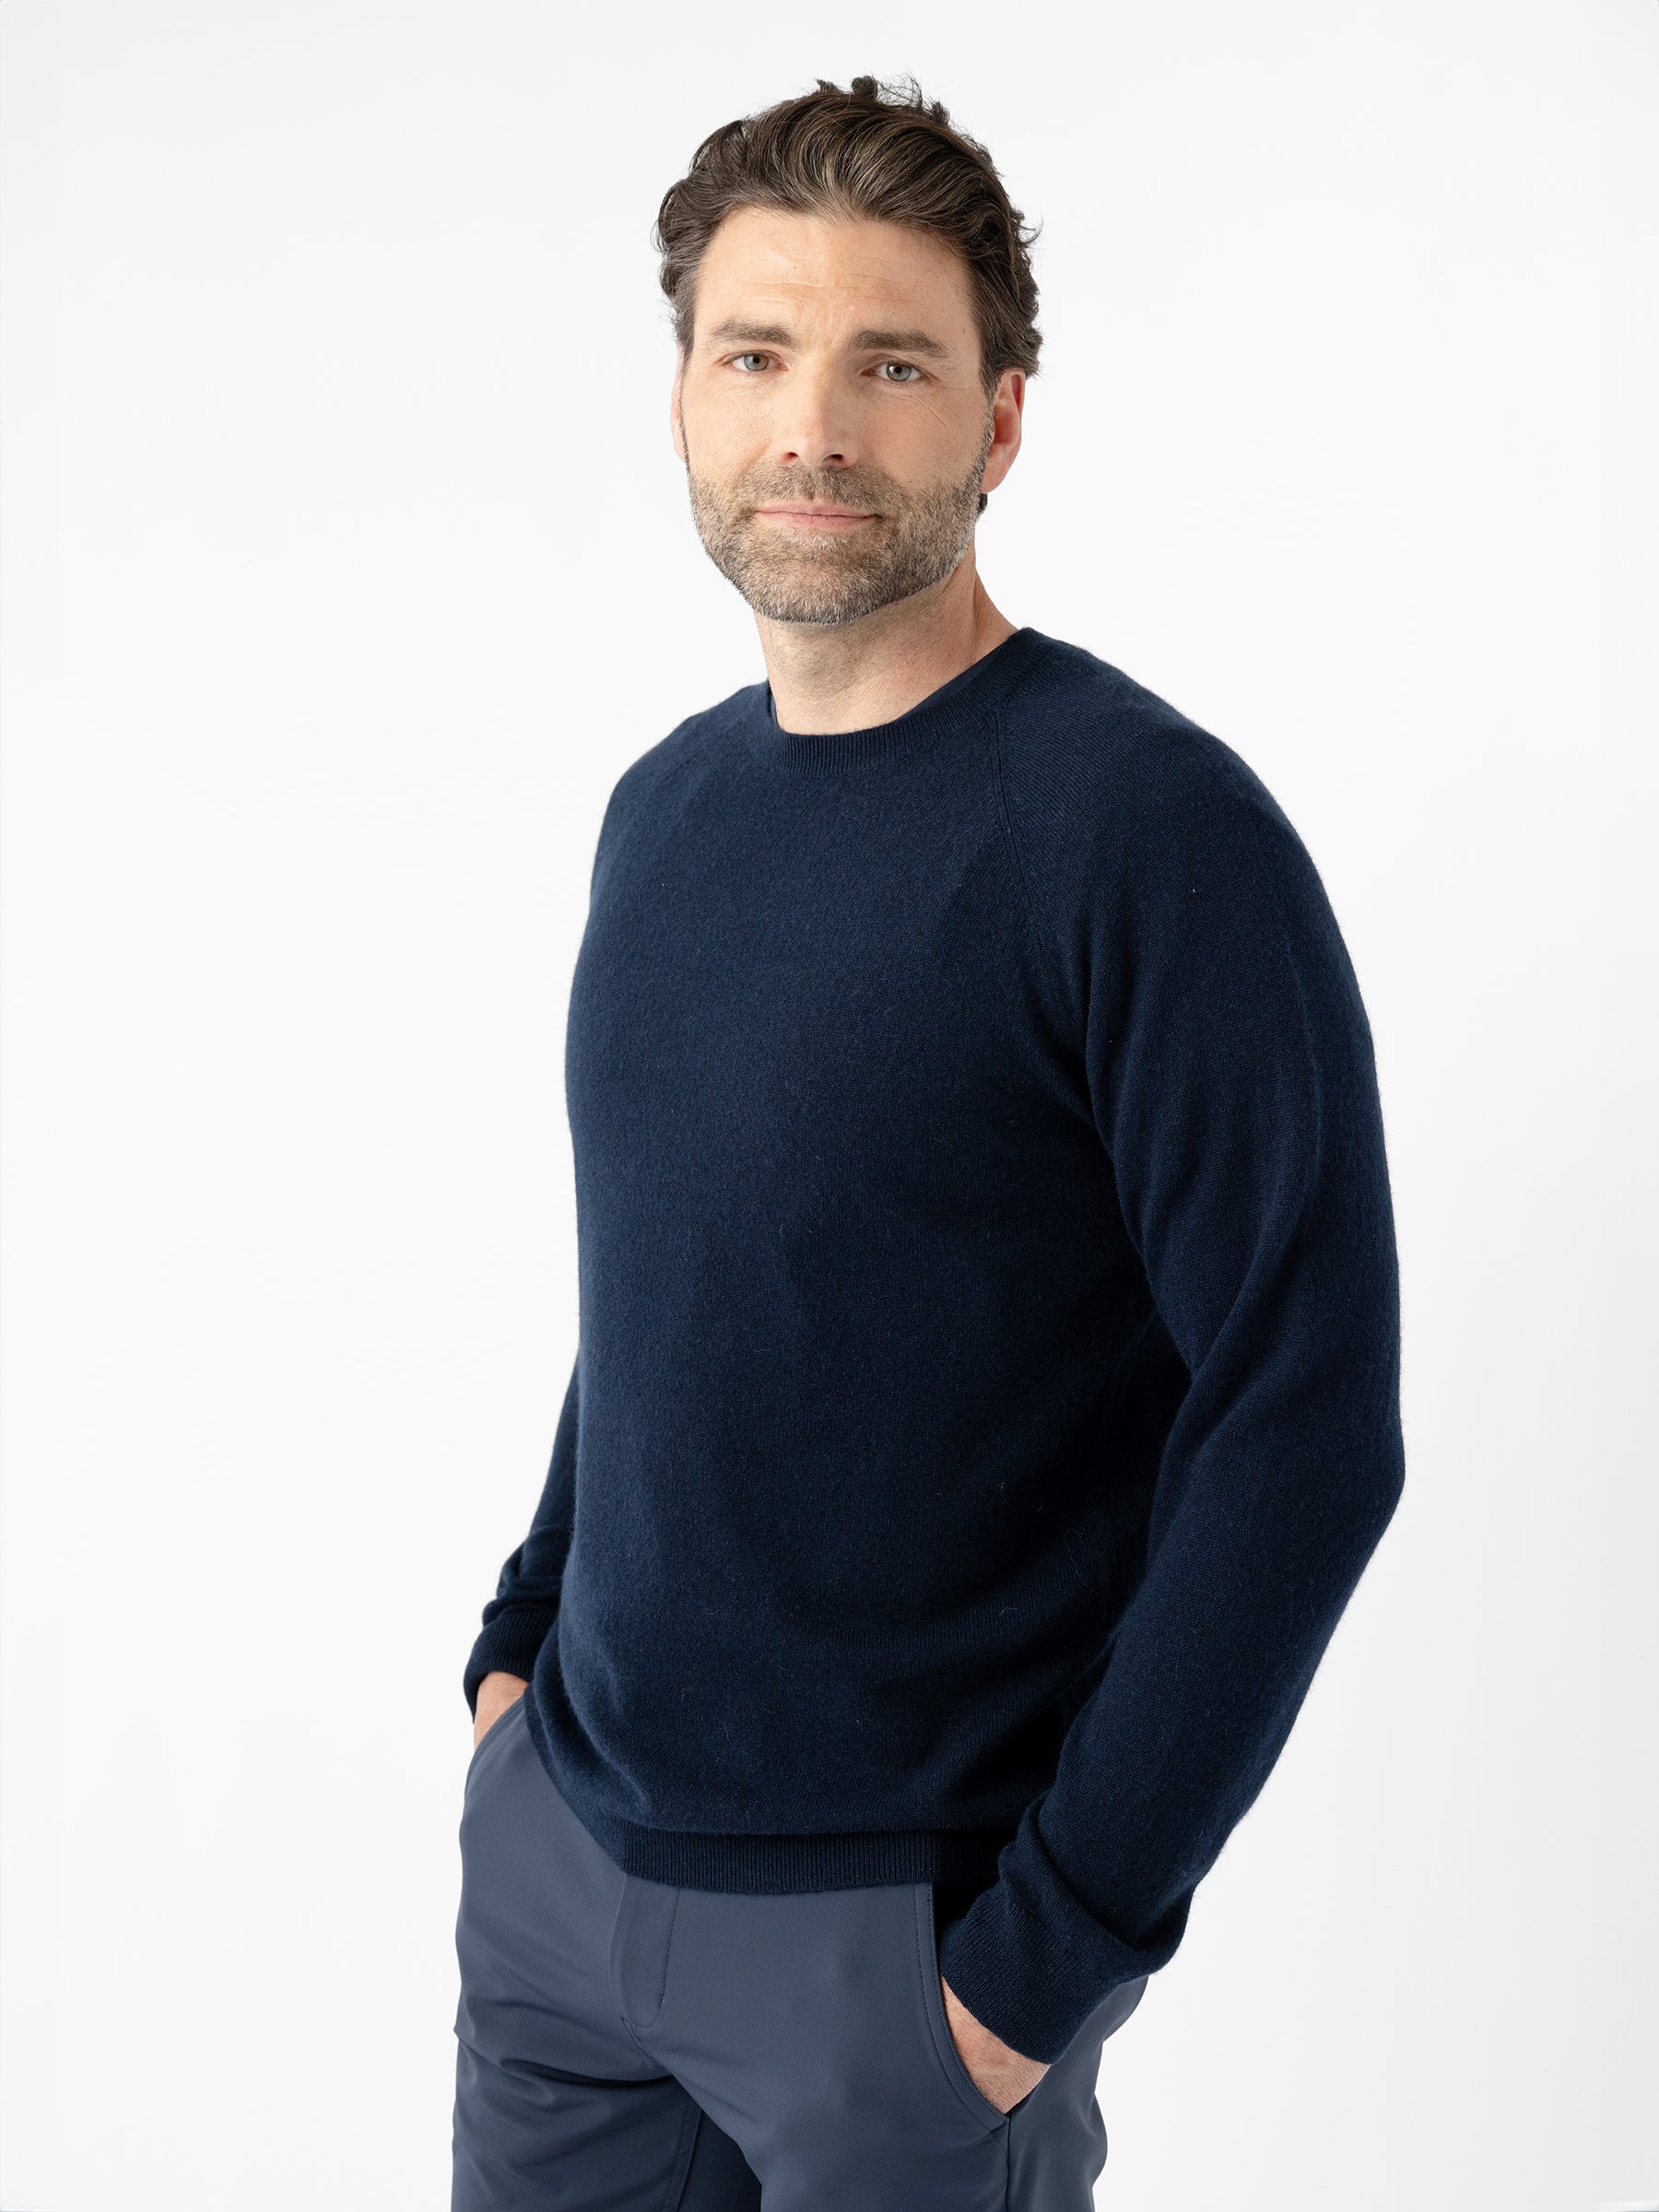 A man with dark hair and a beard stands casually with his hands in his pockets. He is wearing the Cozy Earth Men's Crewneck Sweater in navy blue, paired with gray pants. He looks at the camera with a neutral expression, set against a plain white background. |Color:Eclipse